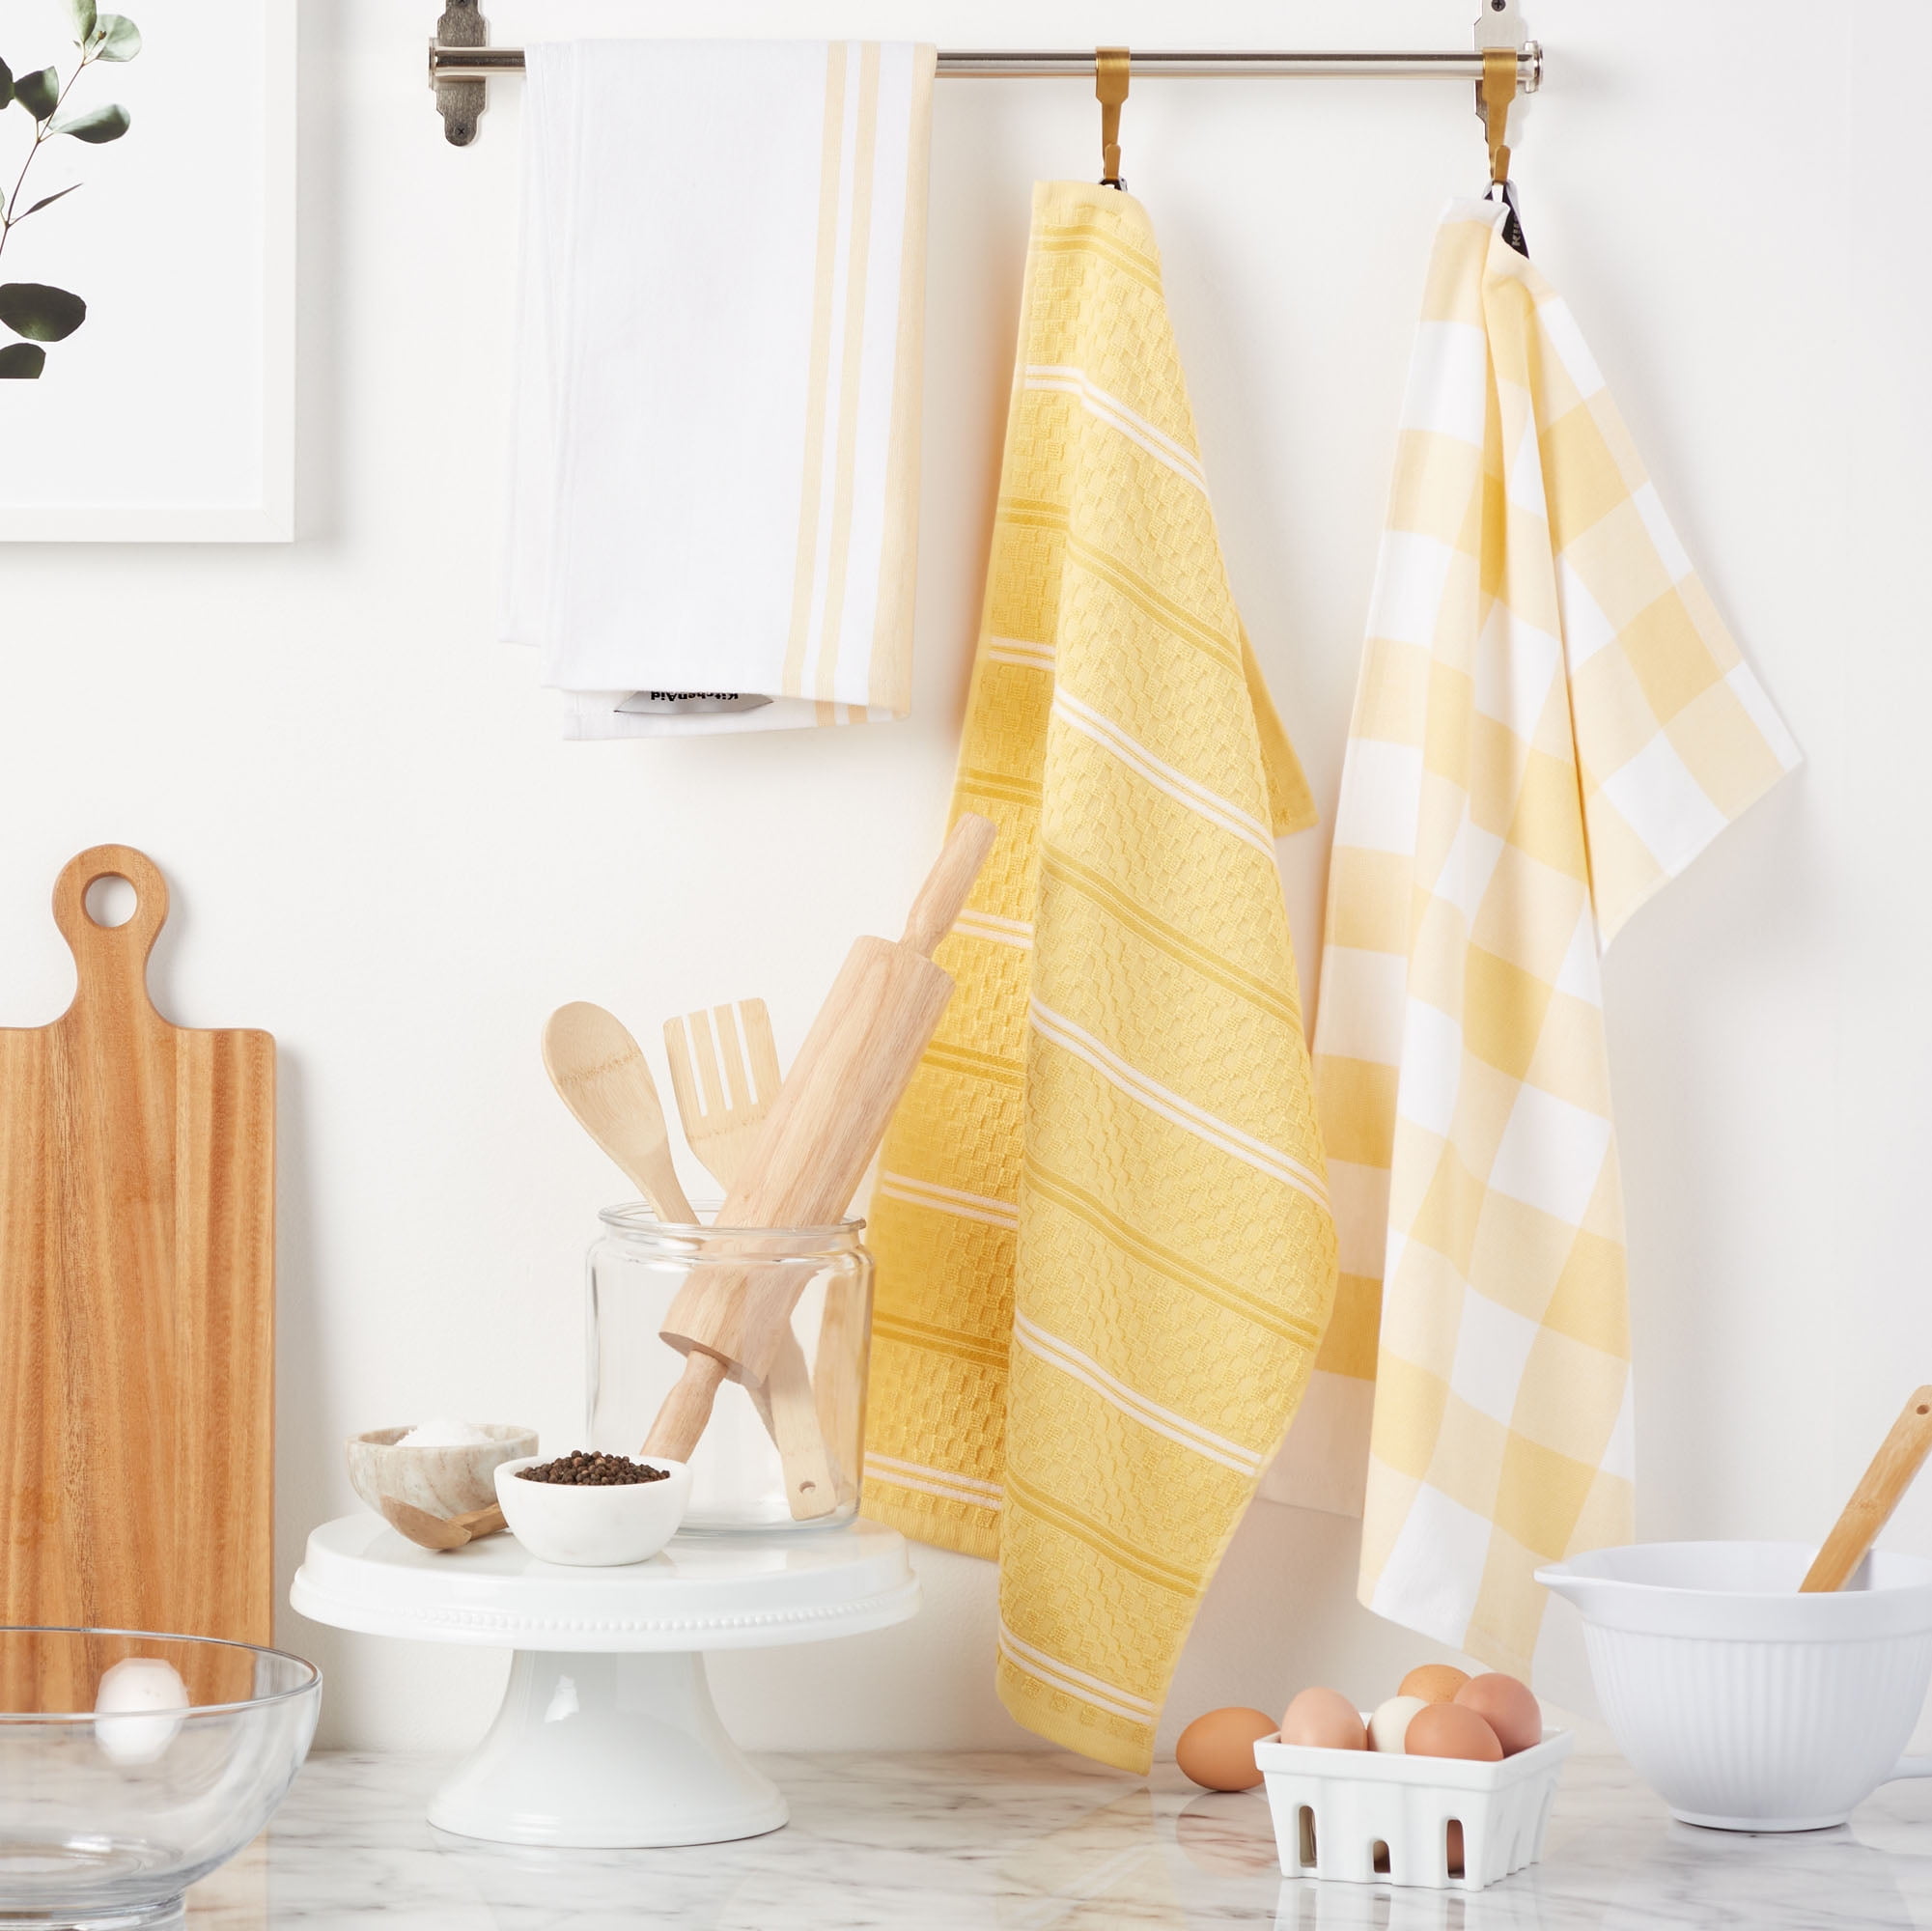 KitchenAid Mixer Yellow/White Solid and Checkered Cotton Kitchen Towel Set  (3-Pack) ST009246TDKA 090 - The Home Depot